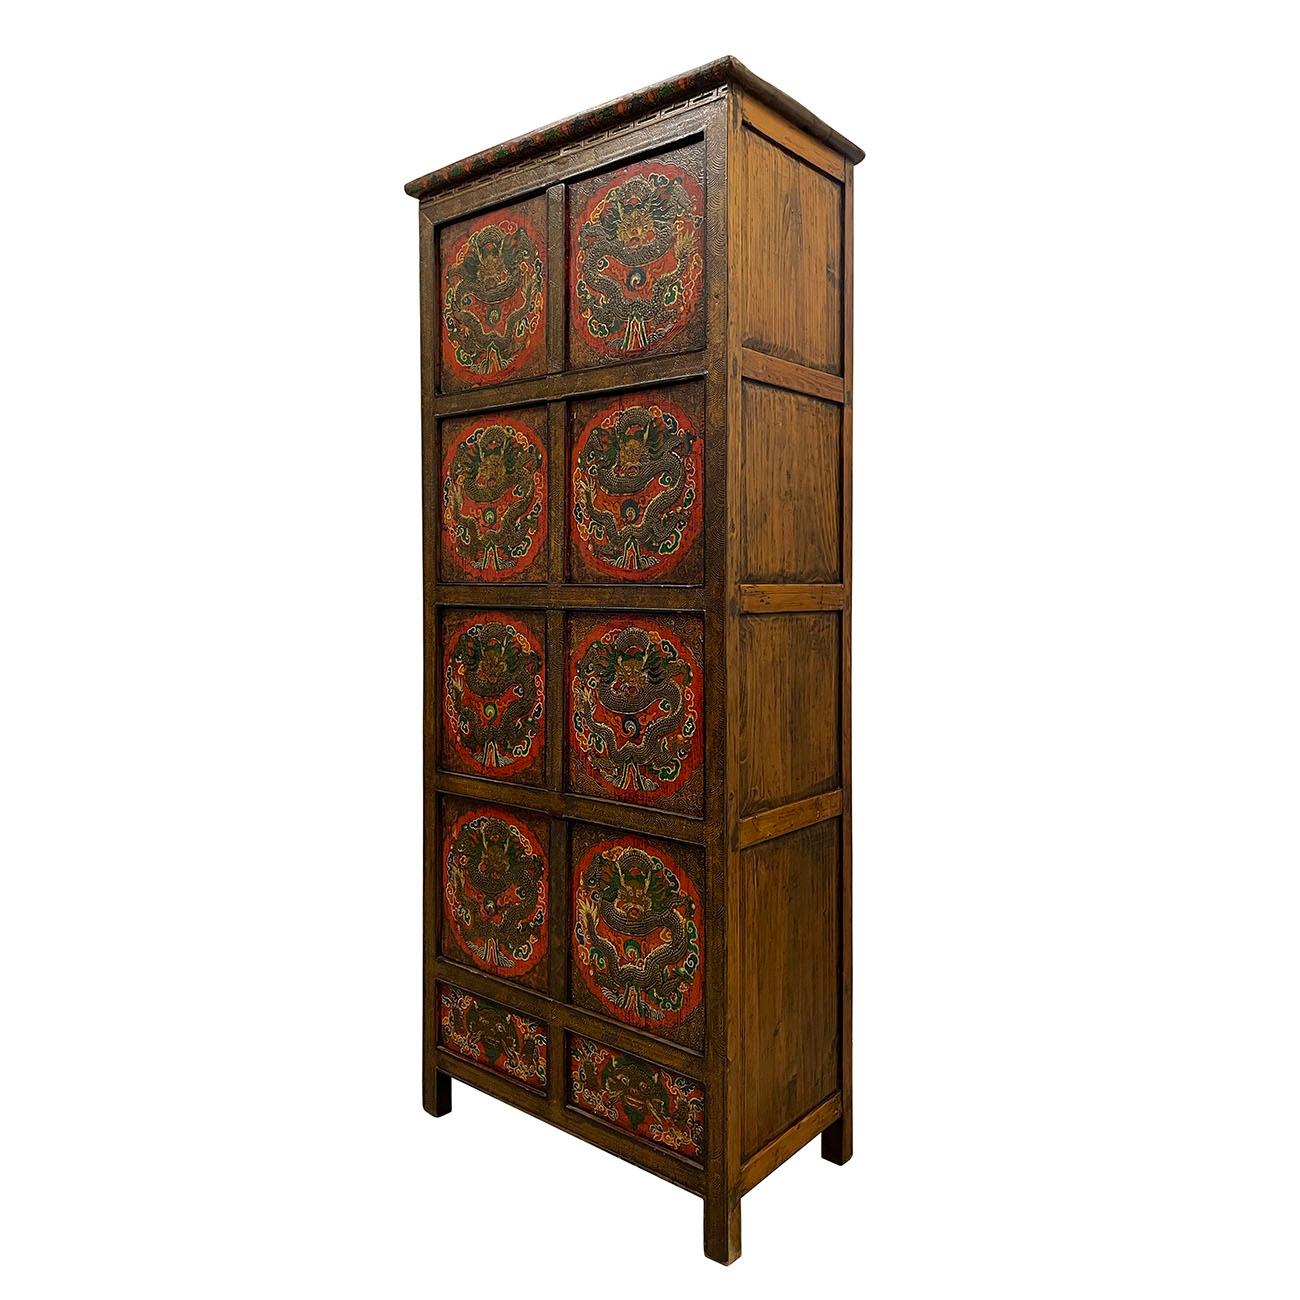 Size: 78.5in H x 33in W x 18in D
Door opening: 13.5in H x 24in W each
Origin: Lhasa, Tibet
Circa: 1900 - 1940
Material: Wood
Condition: Original finished, Hand made, Hand Paint. Normal age wear.

This Antique Tibetan Painted Tall Cabinet is